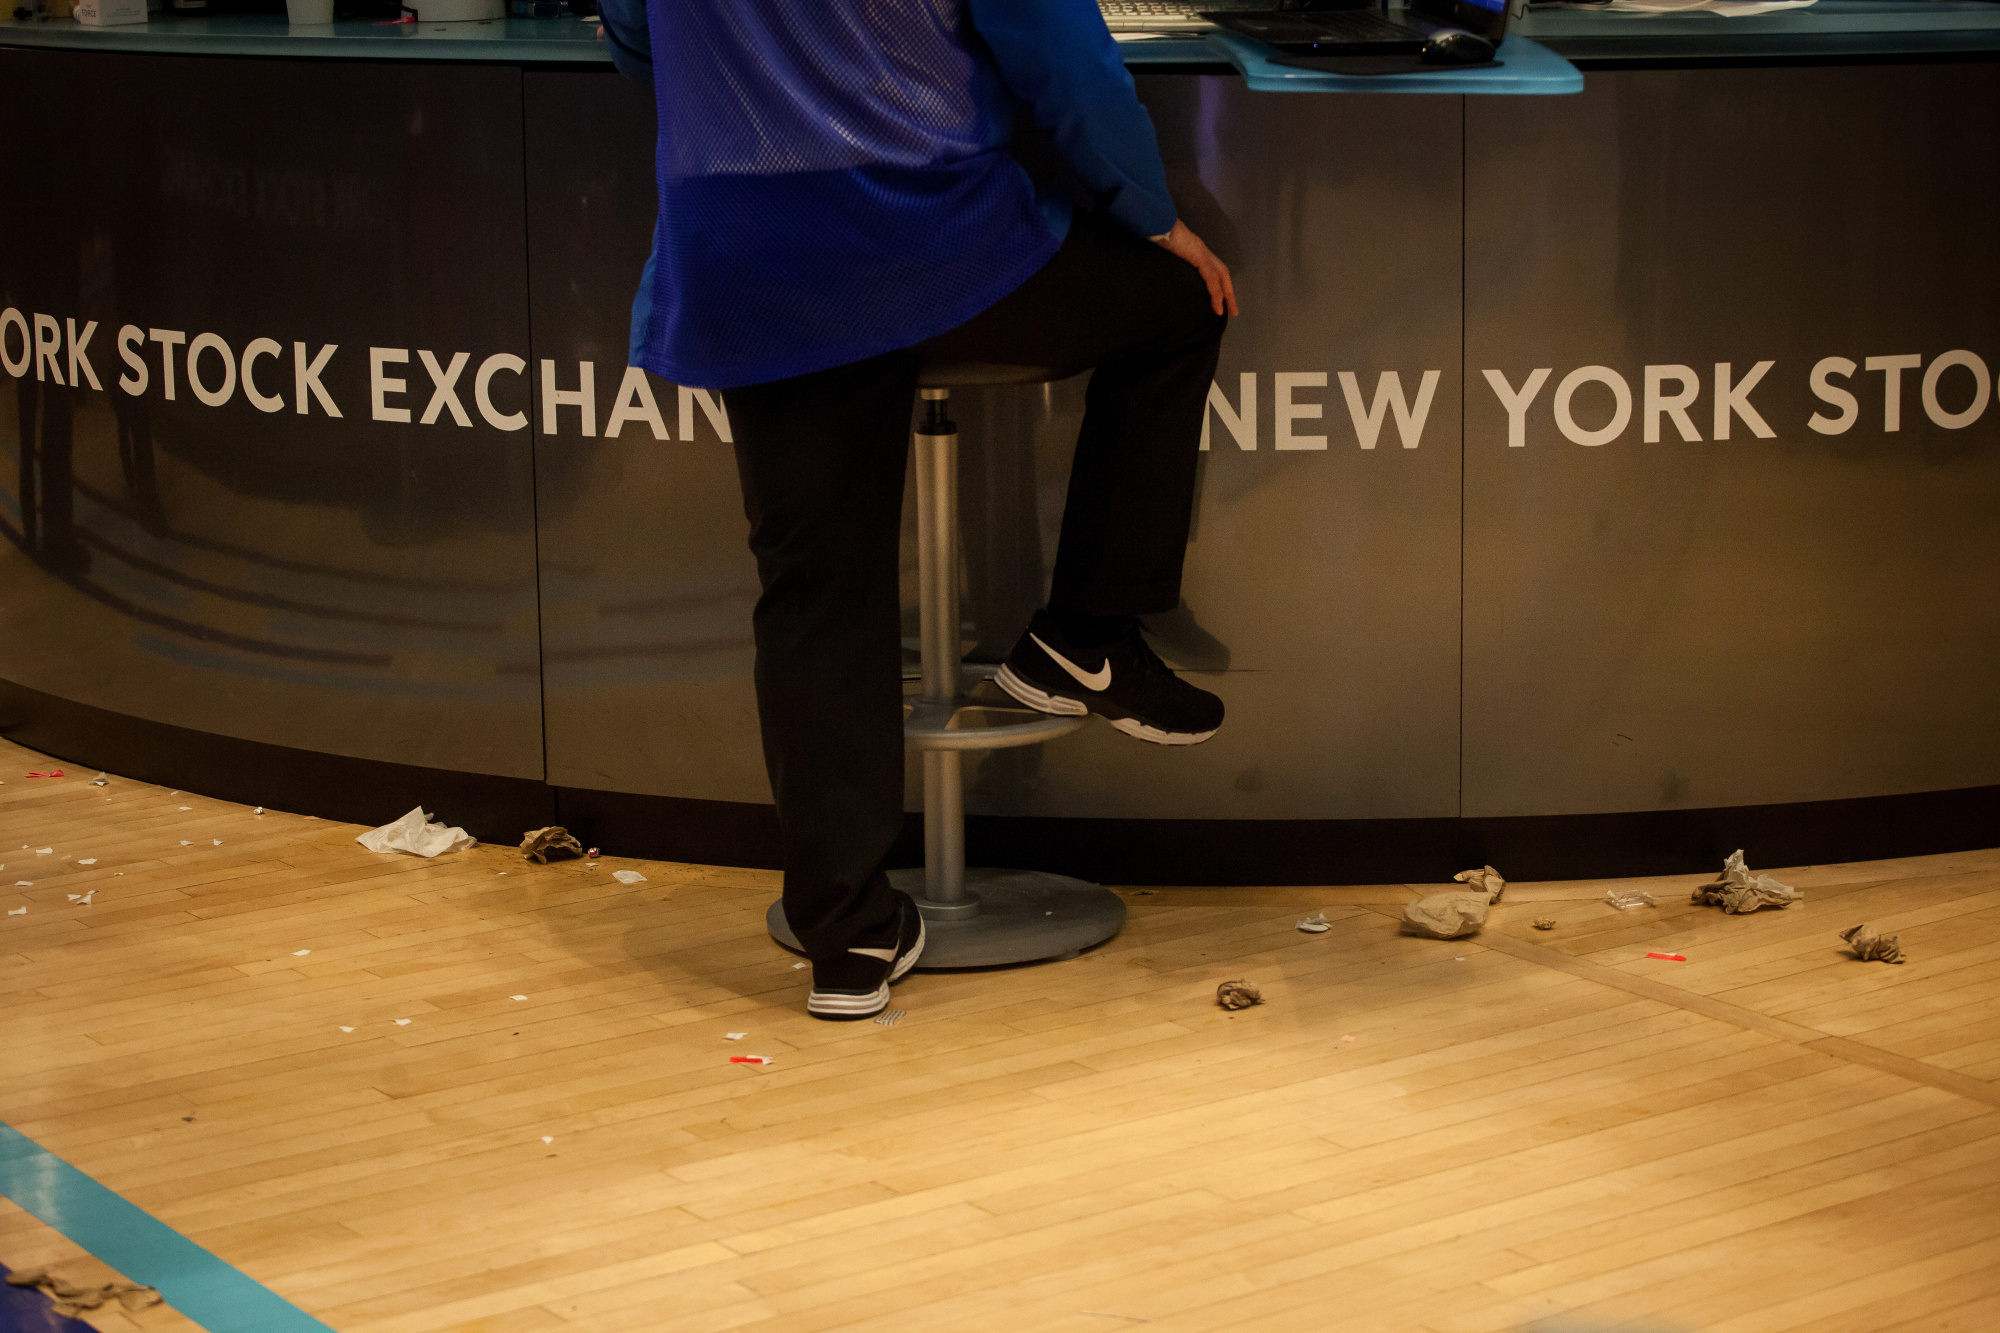 A trader wearing Nike Inc. shoes works on the floor of the New York Stock Exchange (NYSE) in New York, U.S., on Friday, Sept. 29, 2017. U.S. stocks surged to all-time highs while Treasuries slumped amid reports that President Donald Trump and Treasury Secretary Steven Mnuchin met with former Federal Reserve governor Kevin Warsh to discuss the role of Fed chair.